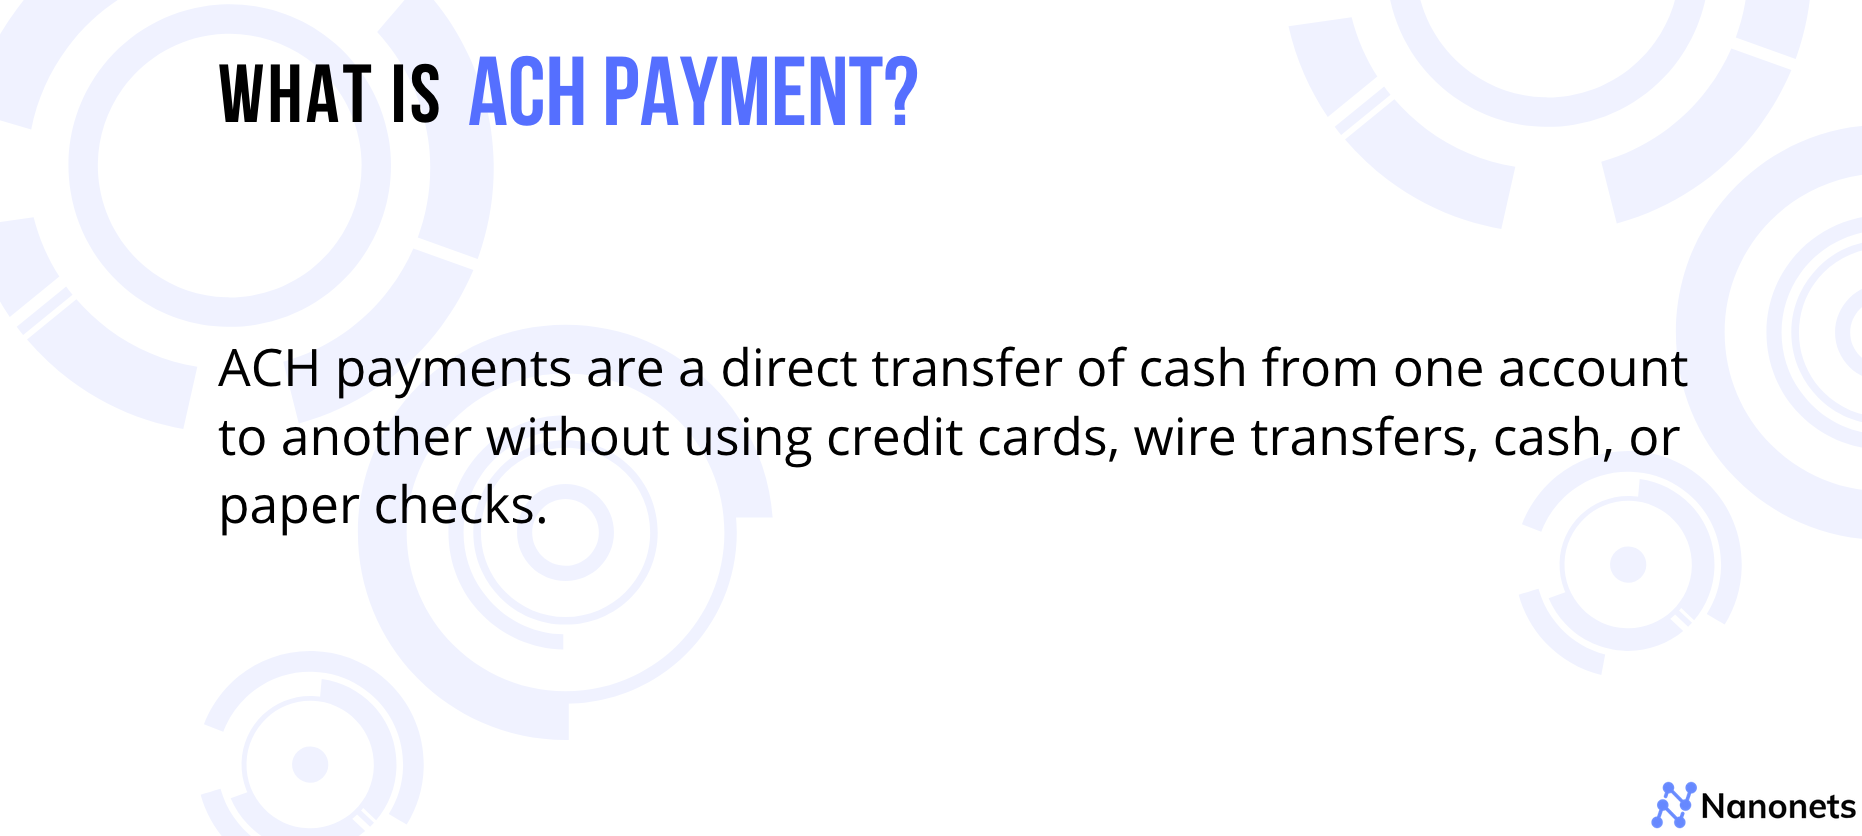 What is ACH payment?